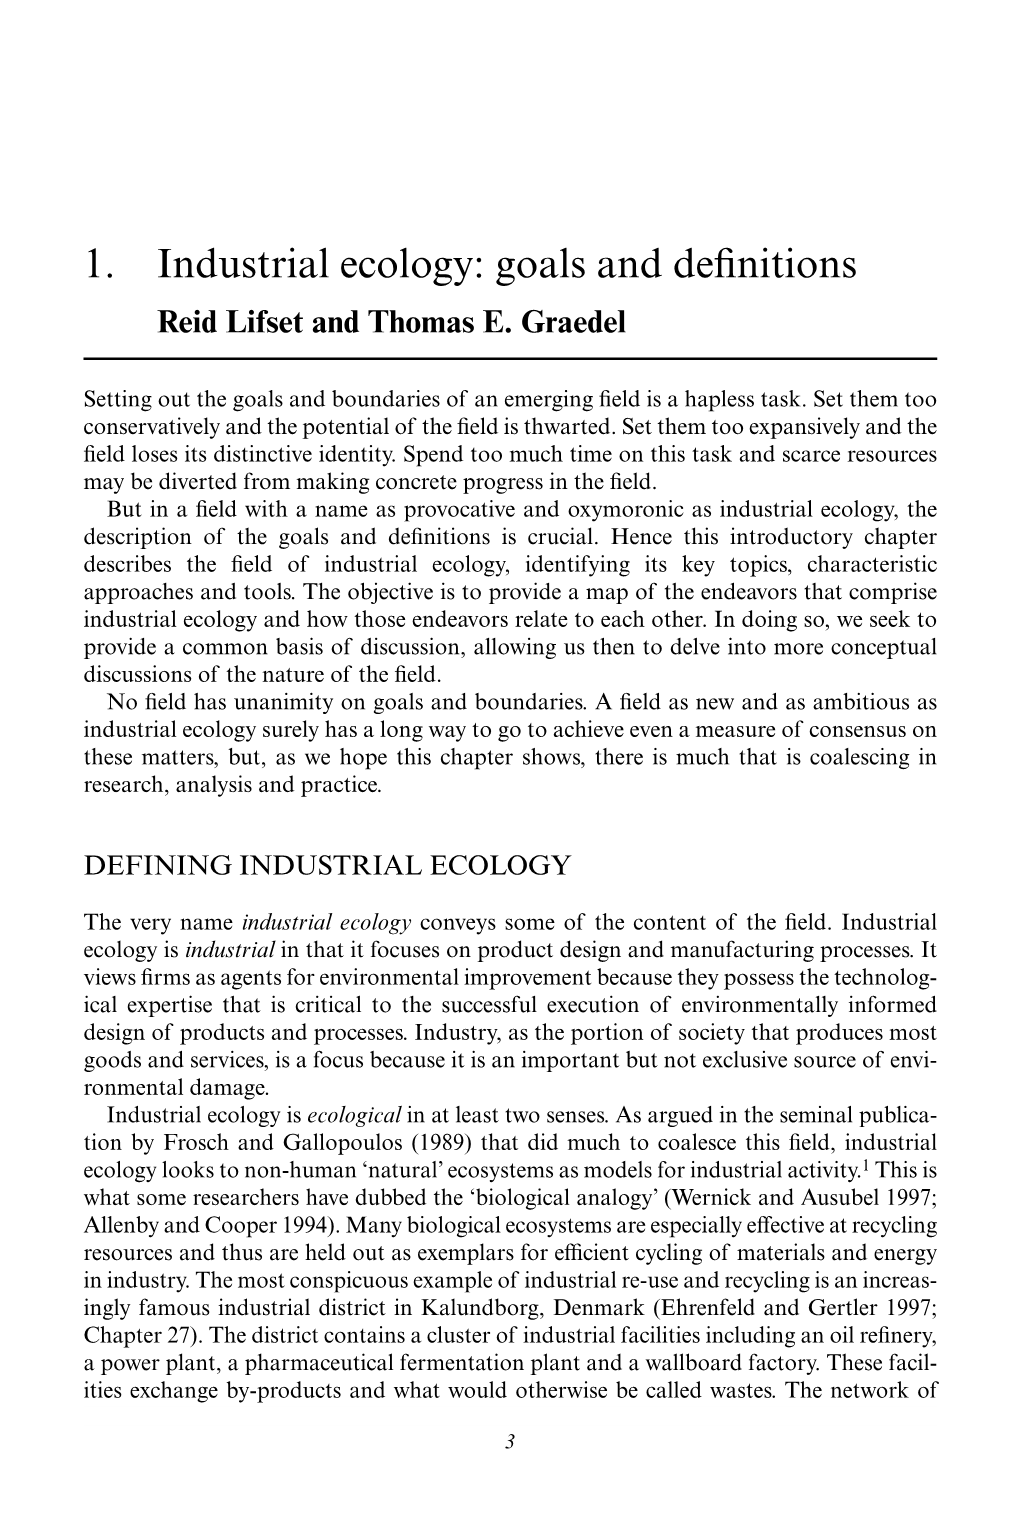 1. Industrial Ecology: Goals and Definitions